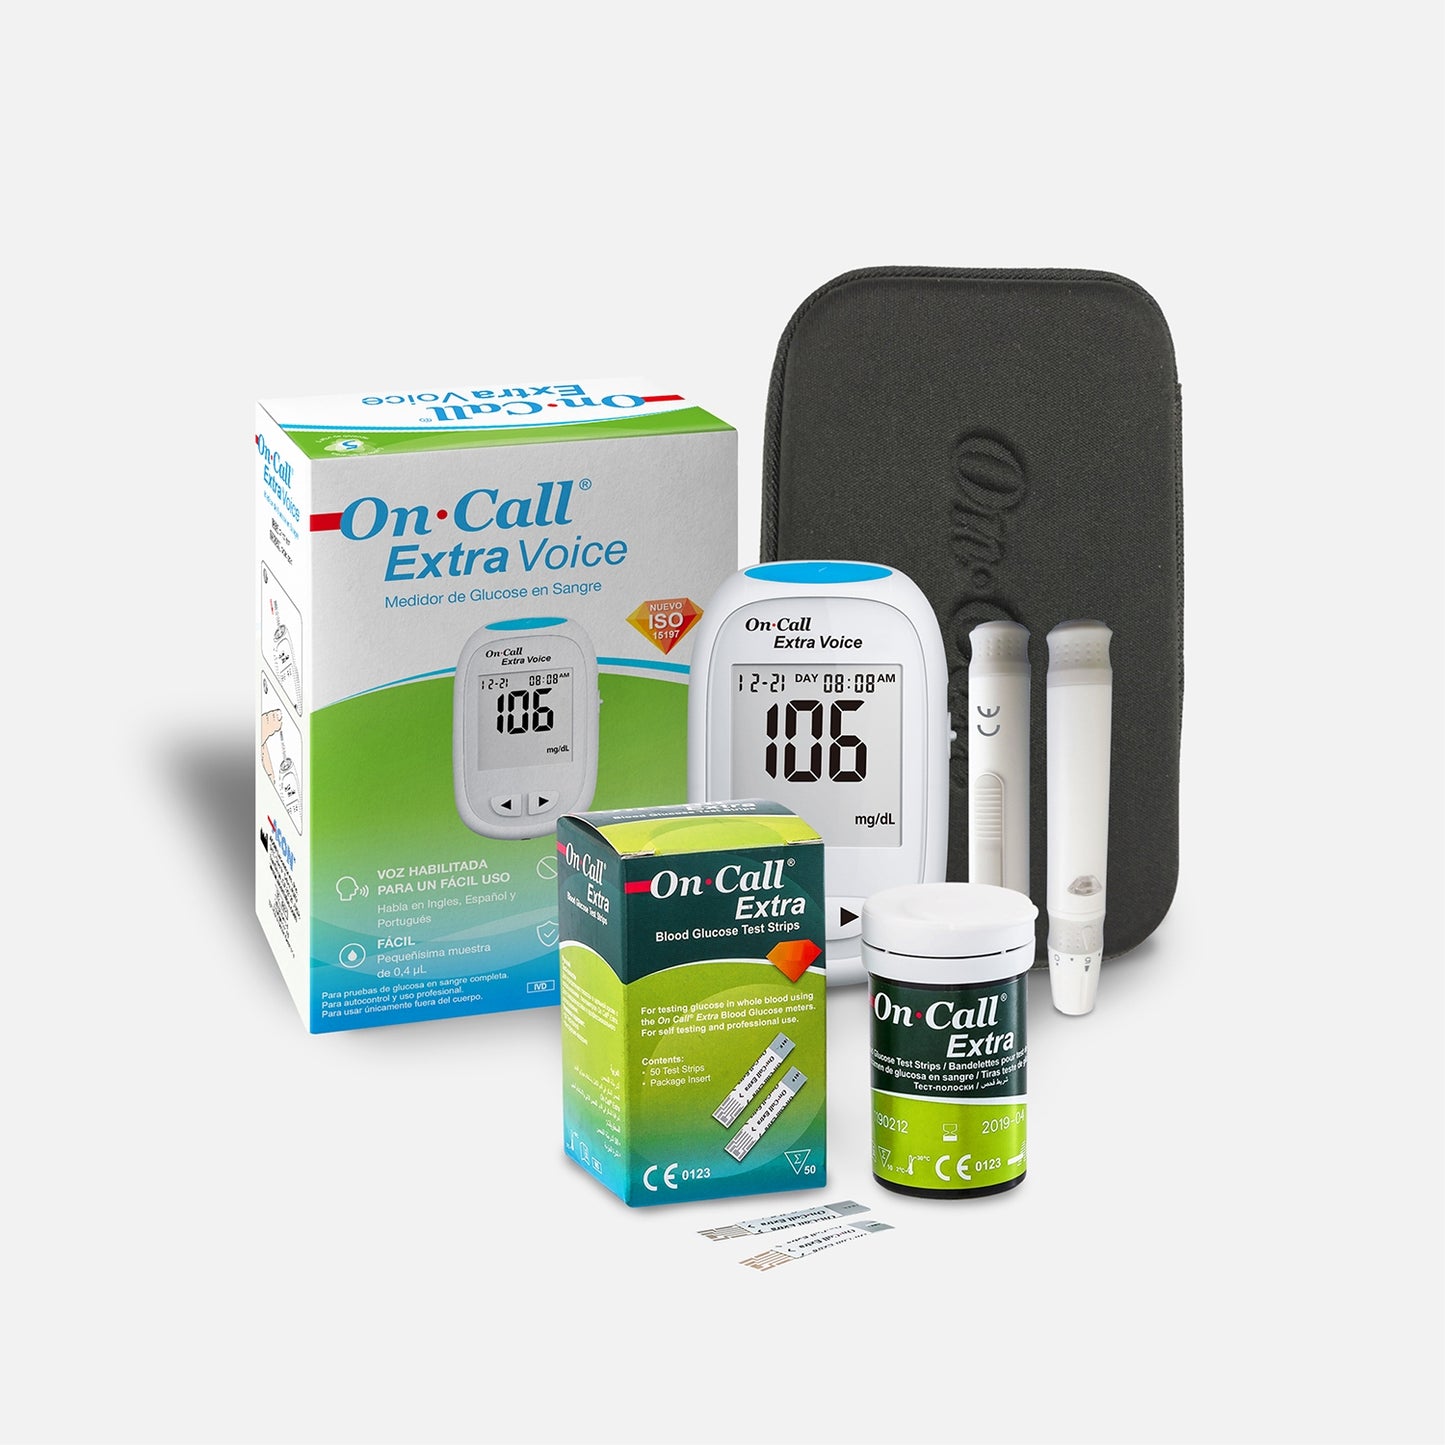 On Call Extra Voice Enabled Blood Glucose Meter